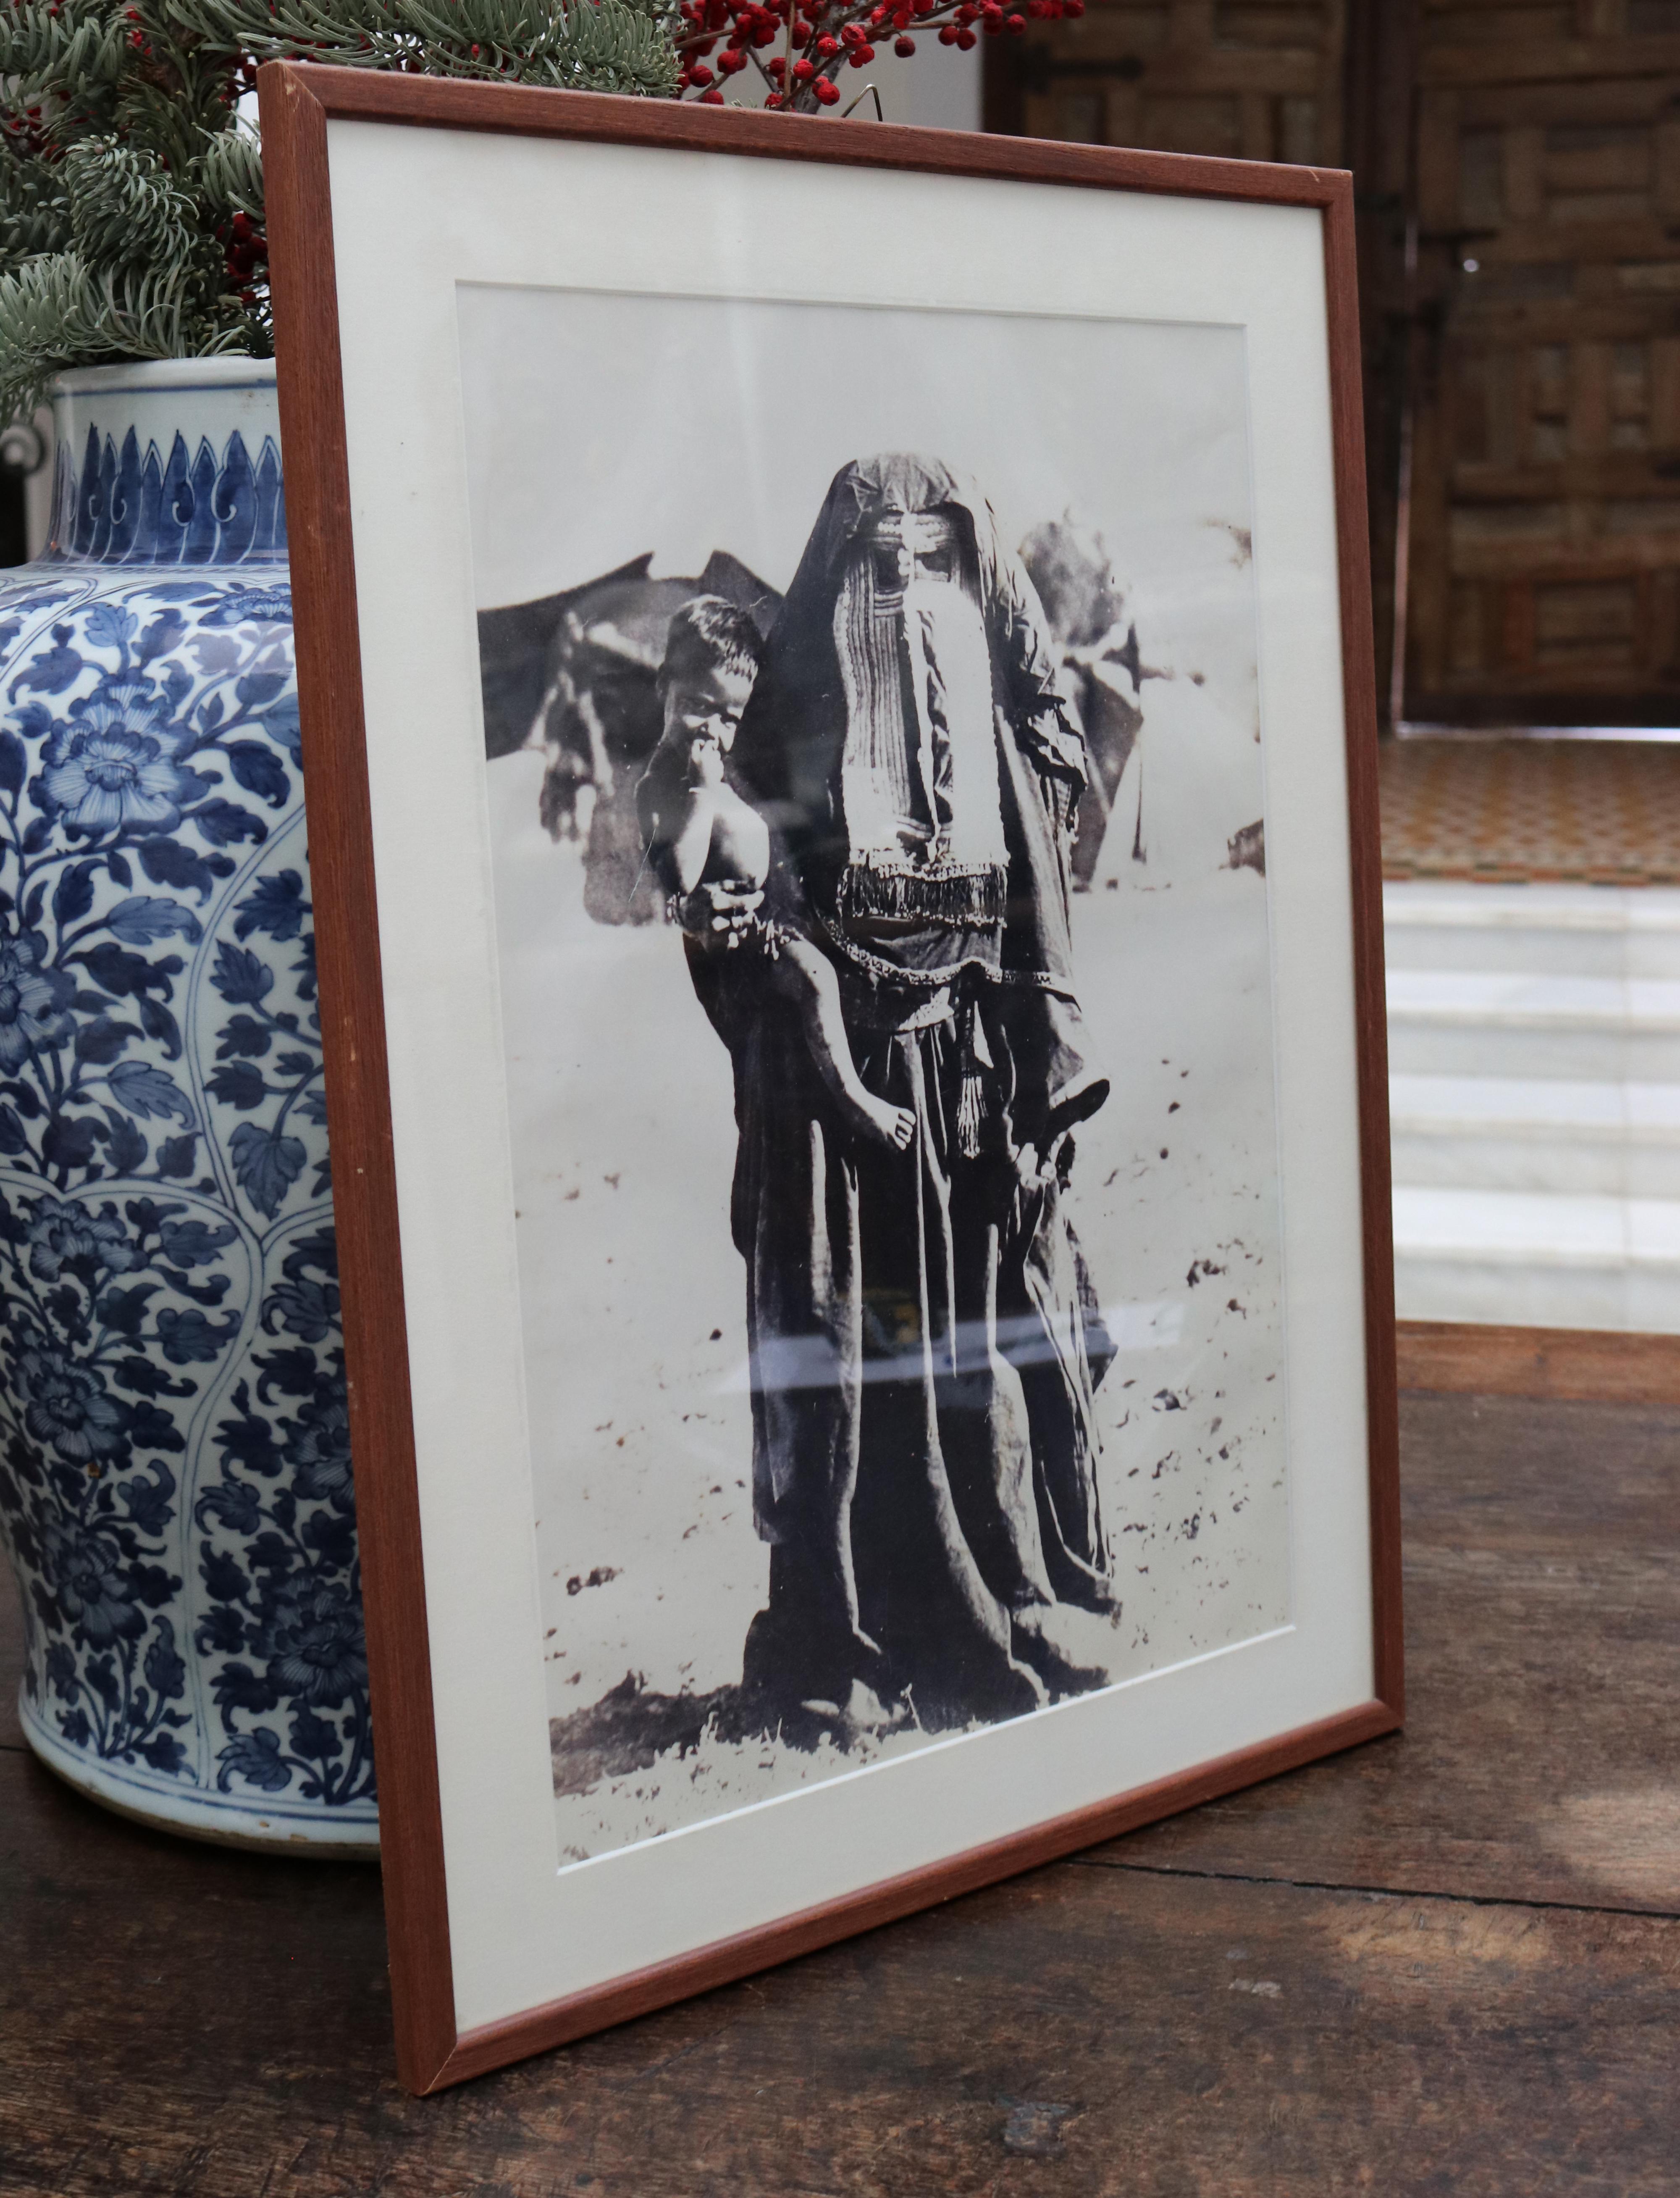 1920s photo of an Arab woman wearing a burqa and holding a child. 

Dimensions with frame: 53 x 39 x 1.5cm.